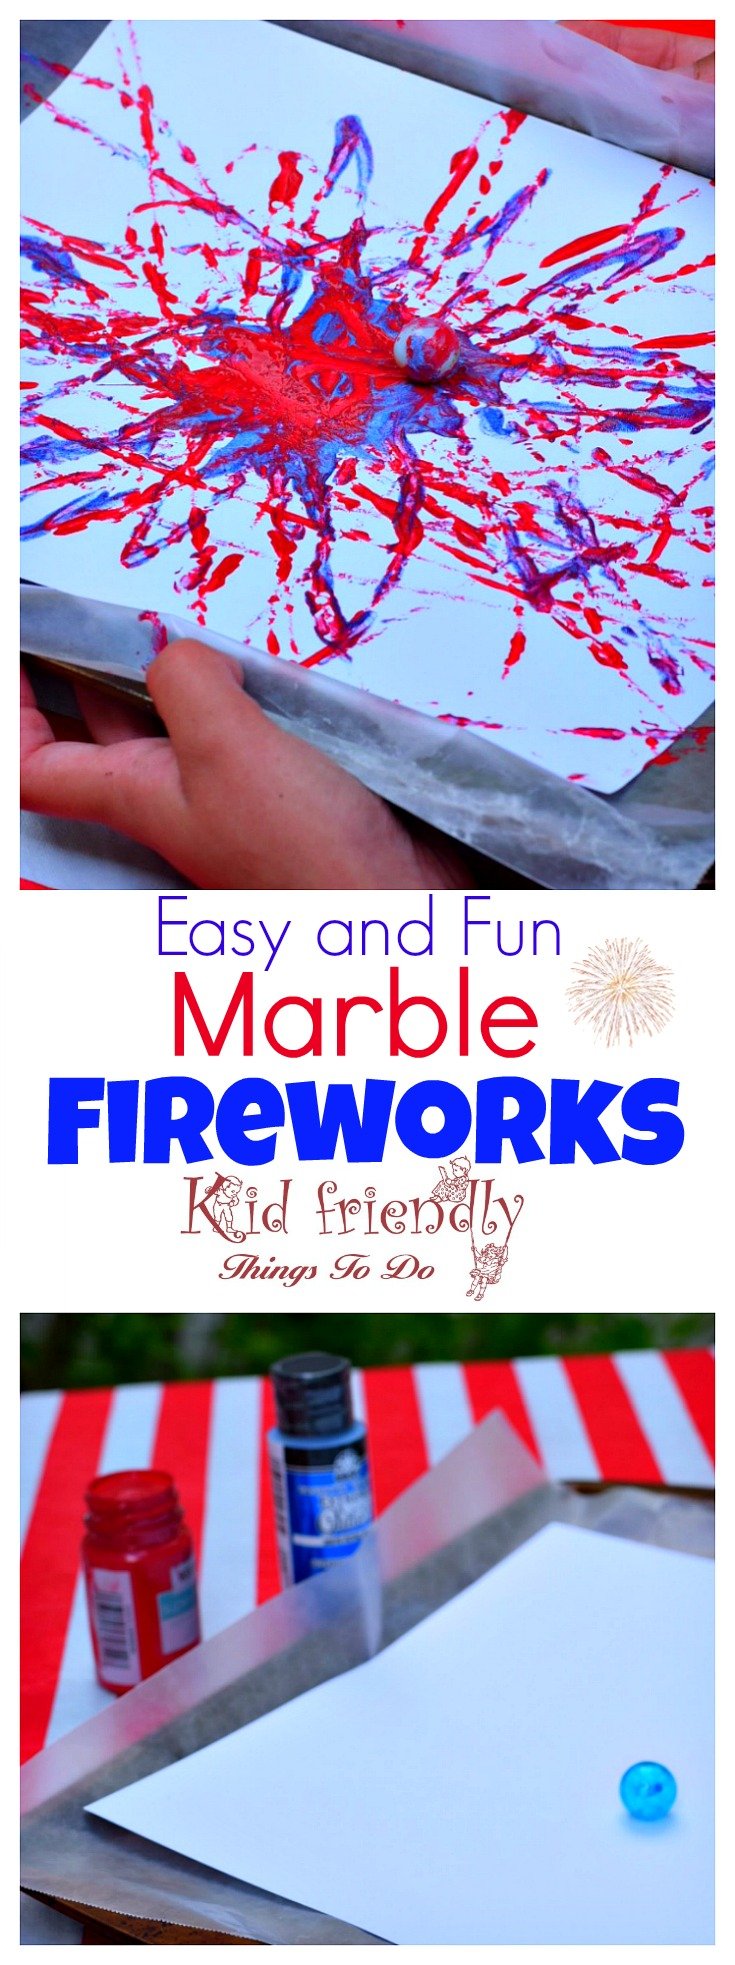 Fireworks Marble Painting Craft Easy and Fun for Kids - Perfect for patriotic holidays like the Fourth of July, Summer Bonfire Nights, and New Year's Eve with the kids! www.kidfriendlythingstodo.com